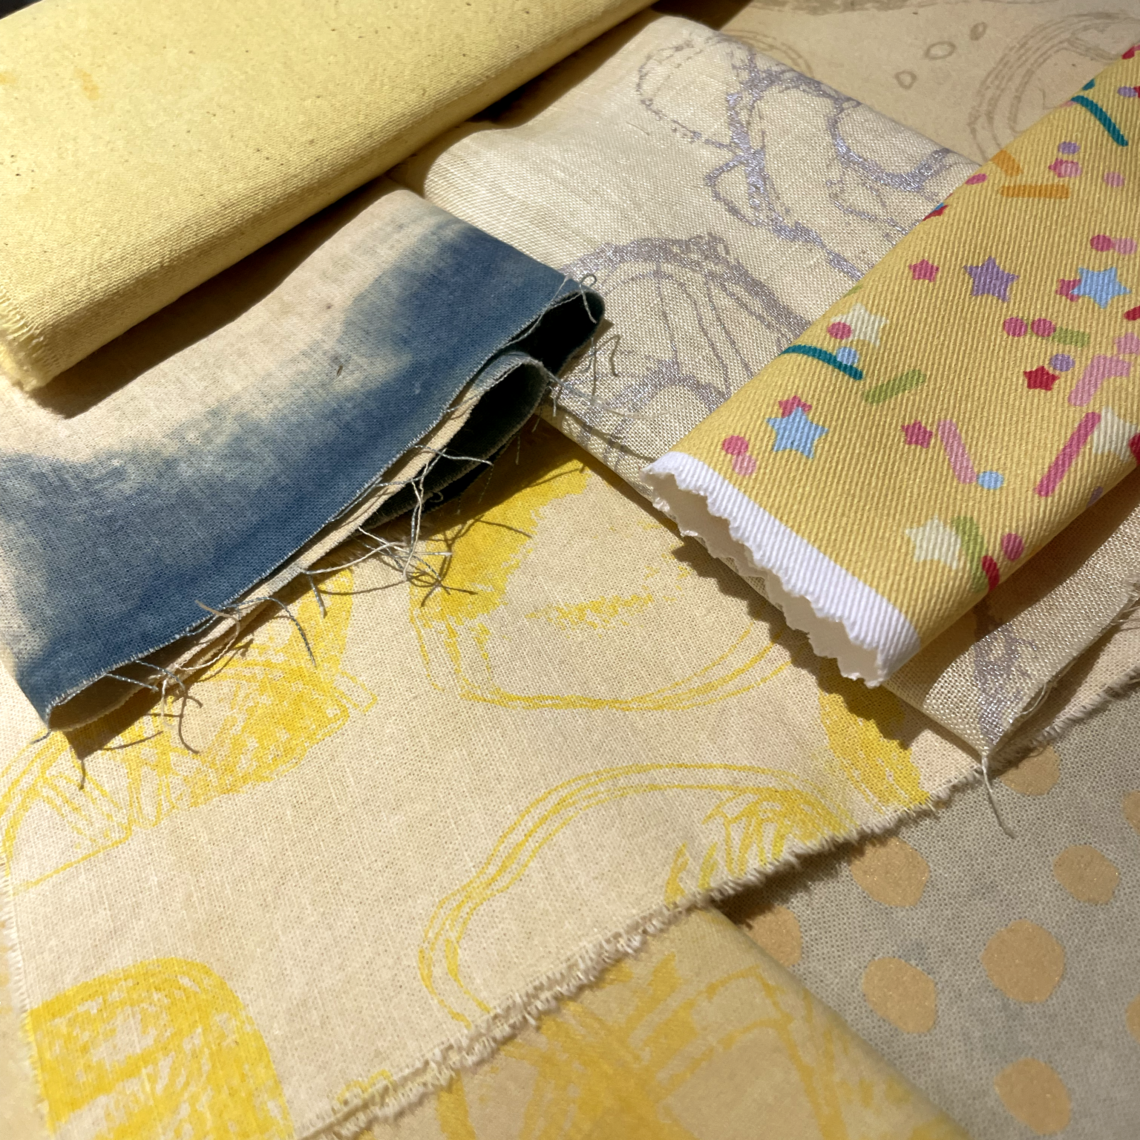 A series of yellow fabrics placed together